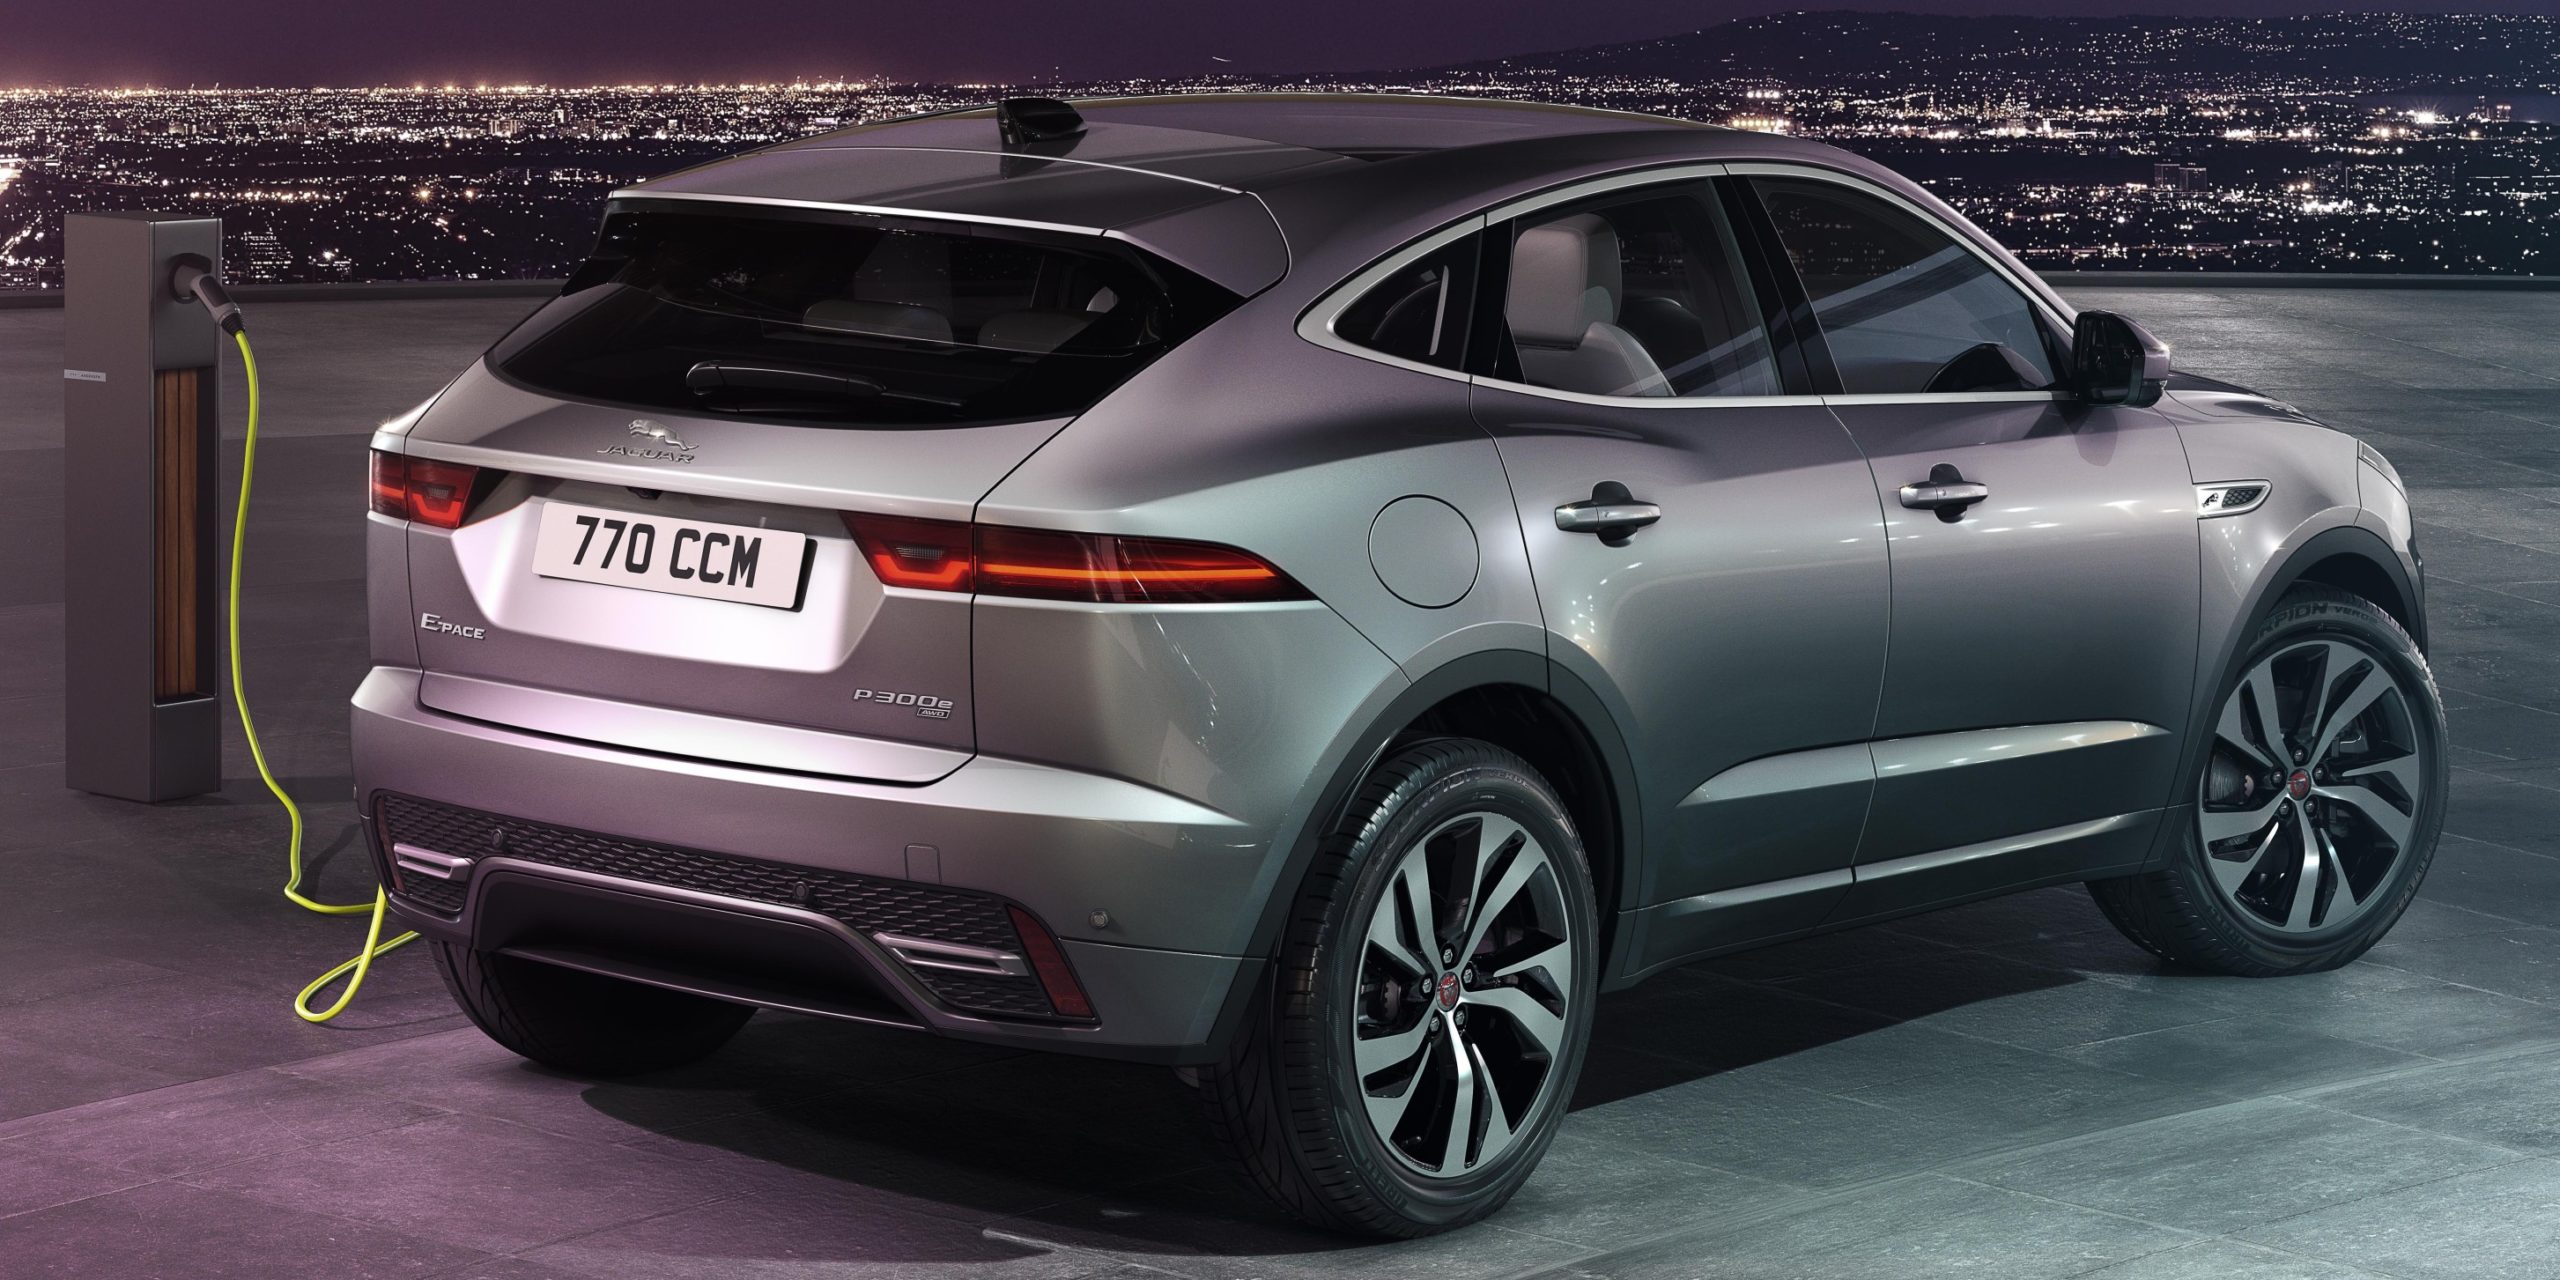 Jaguar E-Pace to release as PHEV in 2021 - electrive.com